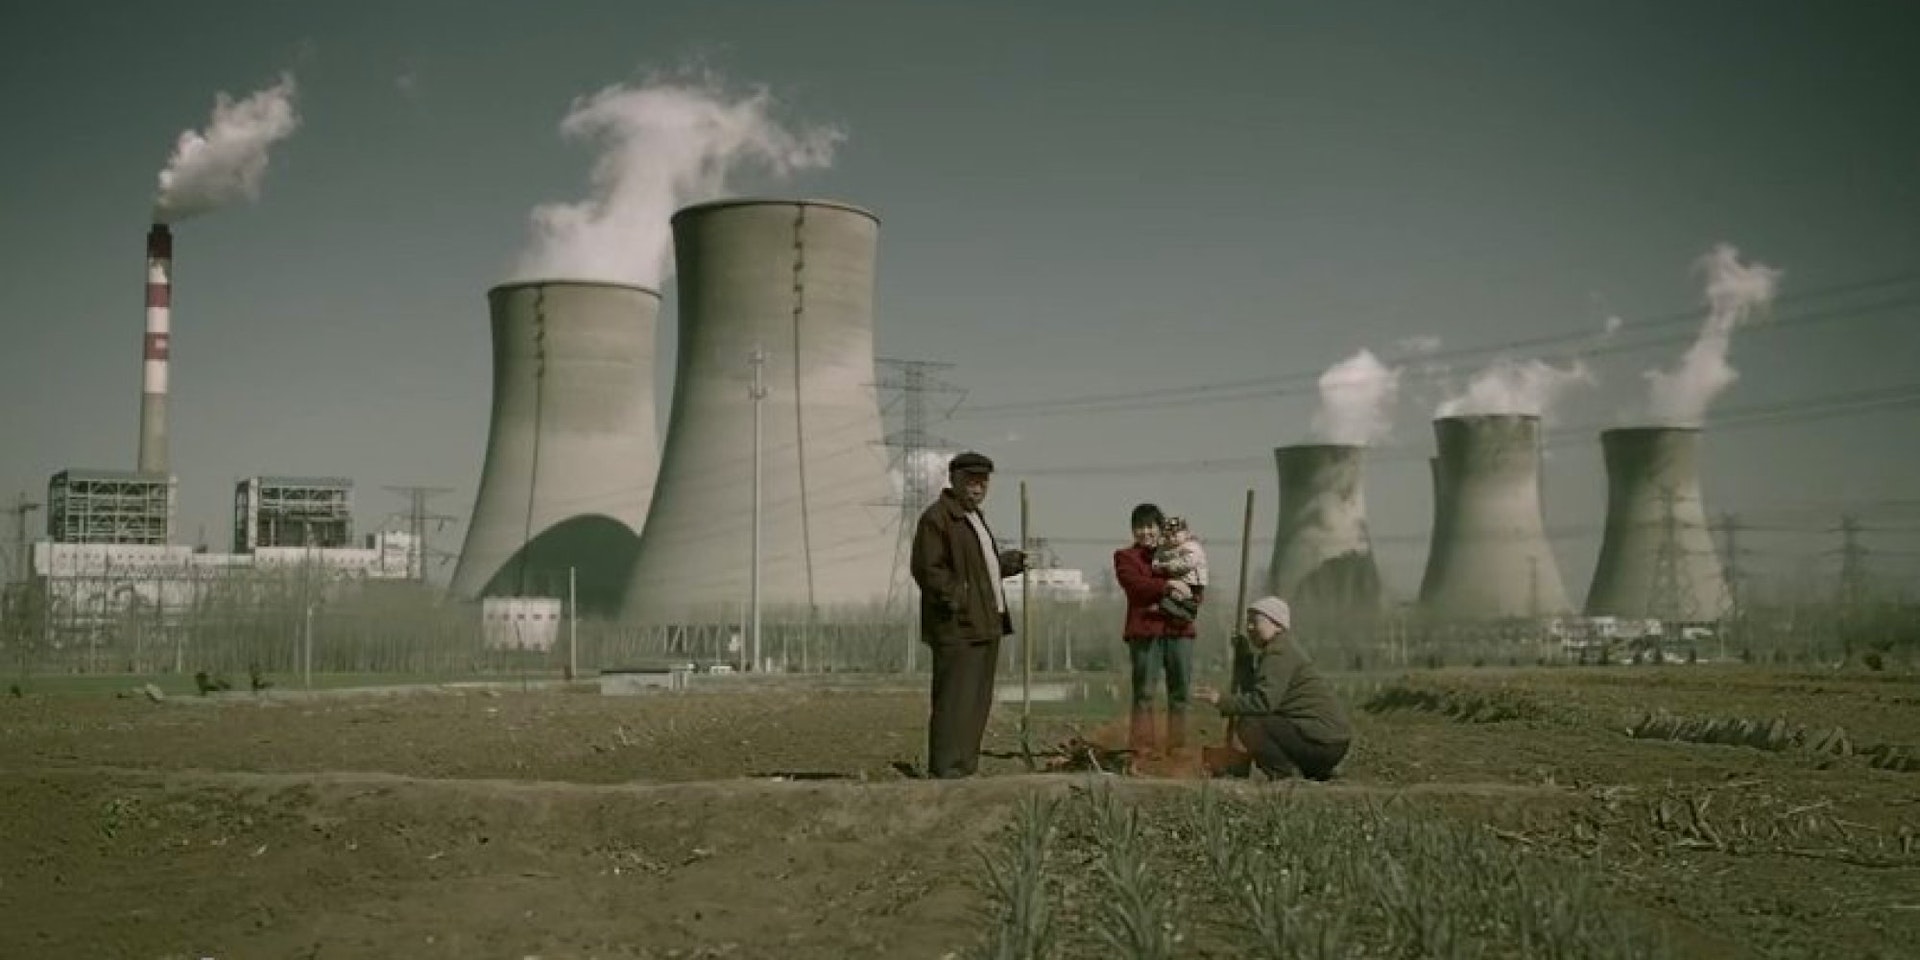 China's leading indie director tackles pollution